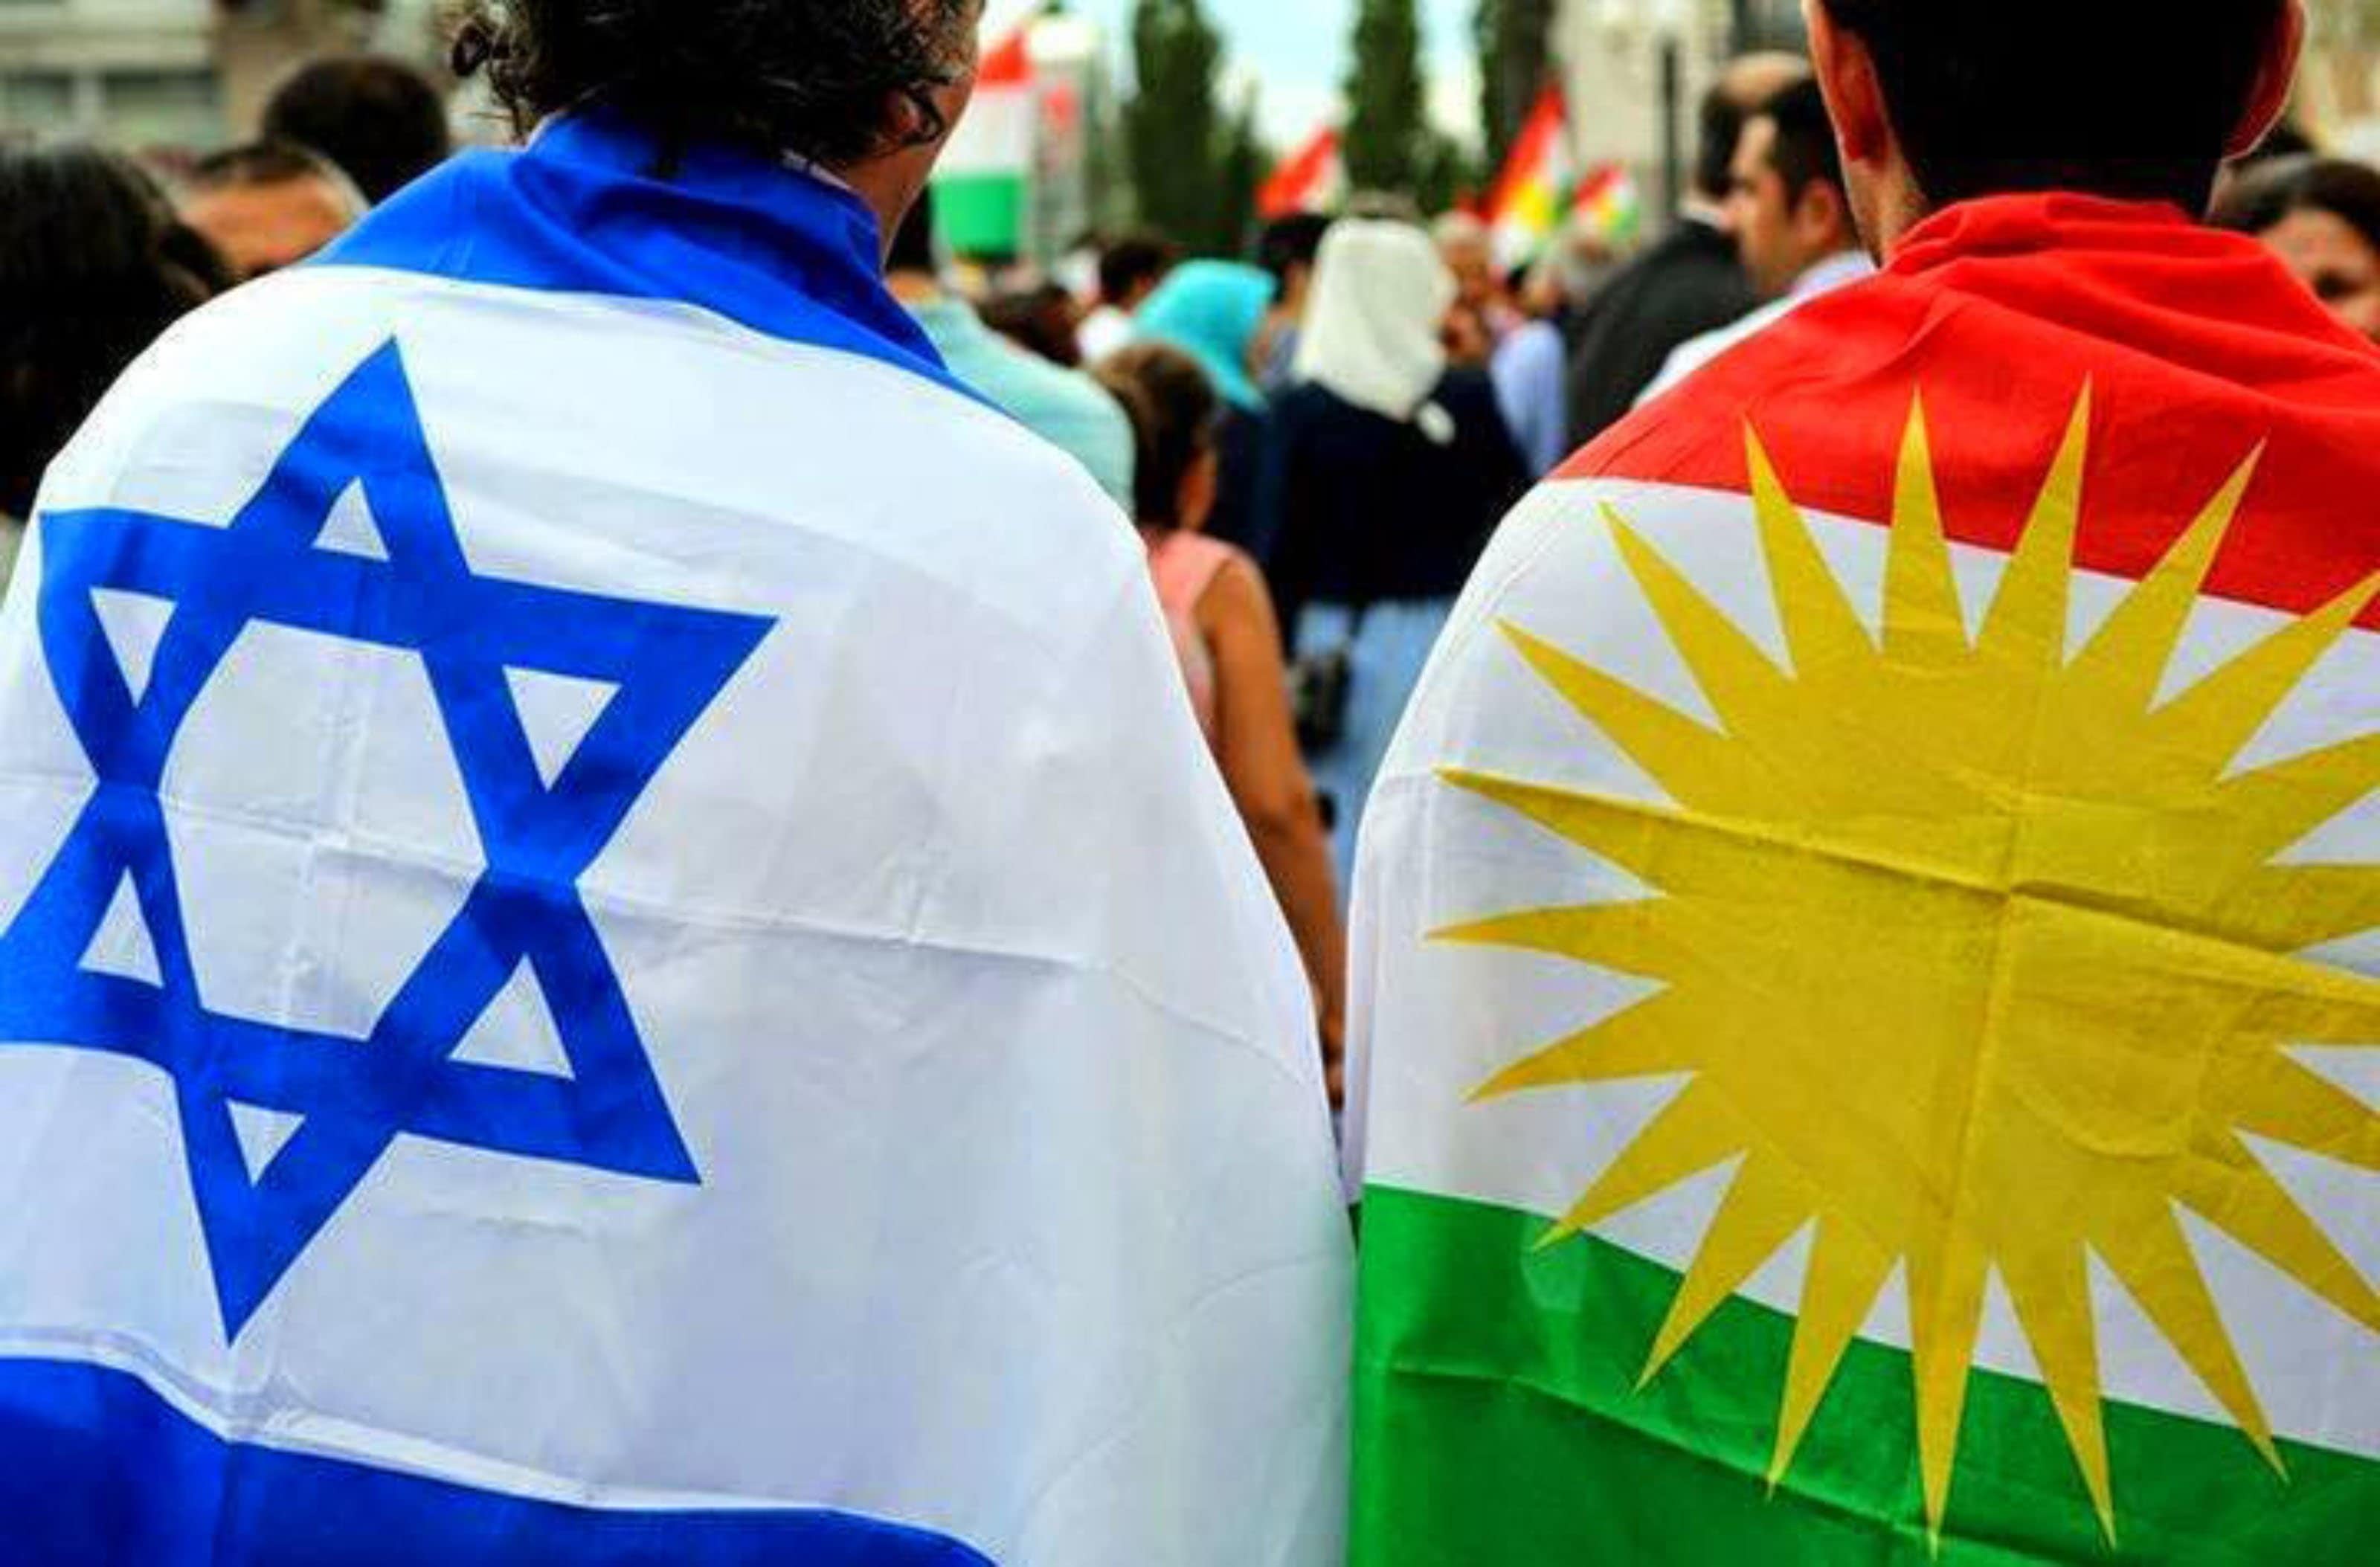 https://thekurdishproject.org/wp-content/uploads/2015/05/flag_of_kurdistan_and_flag_of_israel_by_doganerol1-d8n7xht.jpg